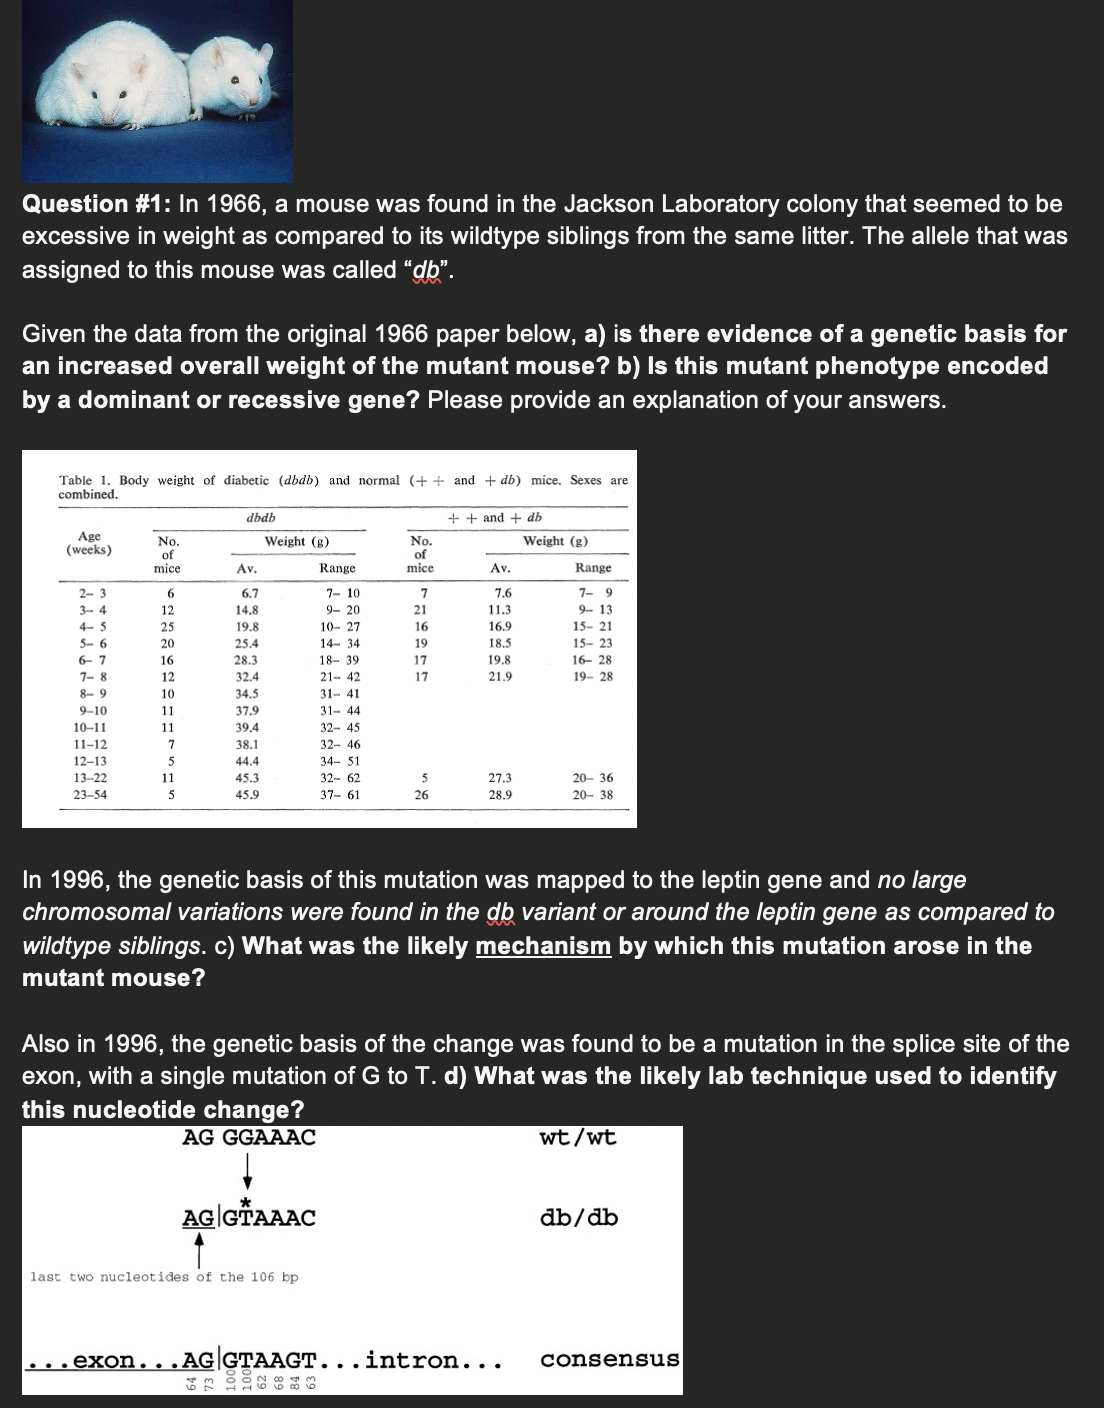 Question #1: In 1966, a mouse was found in the Jackson Laboratory colony that seemed to be
excessive in weight as compared to its wildtype siblings from the same litter. The allele that was
assigned to this mouse was called "db".
Given the data from the original 1966 paper below, a) is there evidence of a genetic basis for
an increased overall weight of the mutant mouse? b) Is this mutant phenotype encoded
by a dominant or recessive gene? Please provide an explanation of your answers.
Table 1. Body weight of diabetic (dbdb) and normal (++ and + db) mice. Sexes are
combined.
Age
(weeks)
2-3
3- 4
4-5
5-6
6-7
7-8
8-9
9-10
10-11
11-12
12-13
13-22
23-54
No.
of
mice.
6
12
25
20
16
12
10
11
11
7
5
11
5
dbdb
Av.
6.7
14.8
19.8
25.4
28.3
32.4
34.5
37.9
39,4
38.1
44.4
45.3
45.9
Weight (g)
AG GTAAAC
Range
7- 10
9- 20
last two nucleotides of the 106 bp
10- 27
14- 34
18-39
21-42
31-41
31-44
BONBO
32- 45
32-46
34-51
32- 62
37-61
No.
of
mice
7
21
16
19
17
17
5
26
++and+ db
Av.
7.6
11.3
16.9
18.5
19.8
21.9
27.3
28.9
In 1996, the genetic basis of this mutation was mapped to the leptin gene and no large
chromosomal variations were found in the db variant or around the leptin gene as compared to
wildtype siblings. c) What was the likely mechanism by which this mutation arose in the
mutant mouse?
Weight (g)
Also in 1996, the genetic basis of the change was found to be a mutation in the splice site of the
exon, with a single mutation of G to T. d) What was the likely lab technique used to identify
this nucleotide change?
AG GGAAAC
...exon...AG GTAAGT...intron...
Range
7-9
9- 13
15- 21
15- 23
16-28
19- 28
20-36
20-38
wt/wt
db/db
consensus